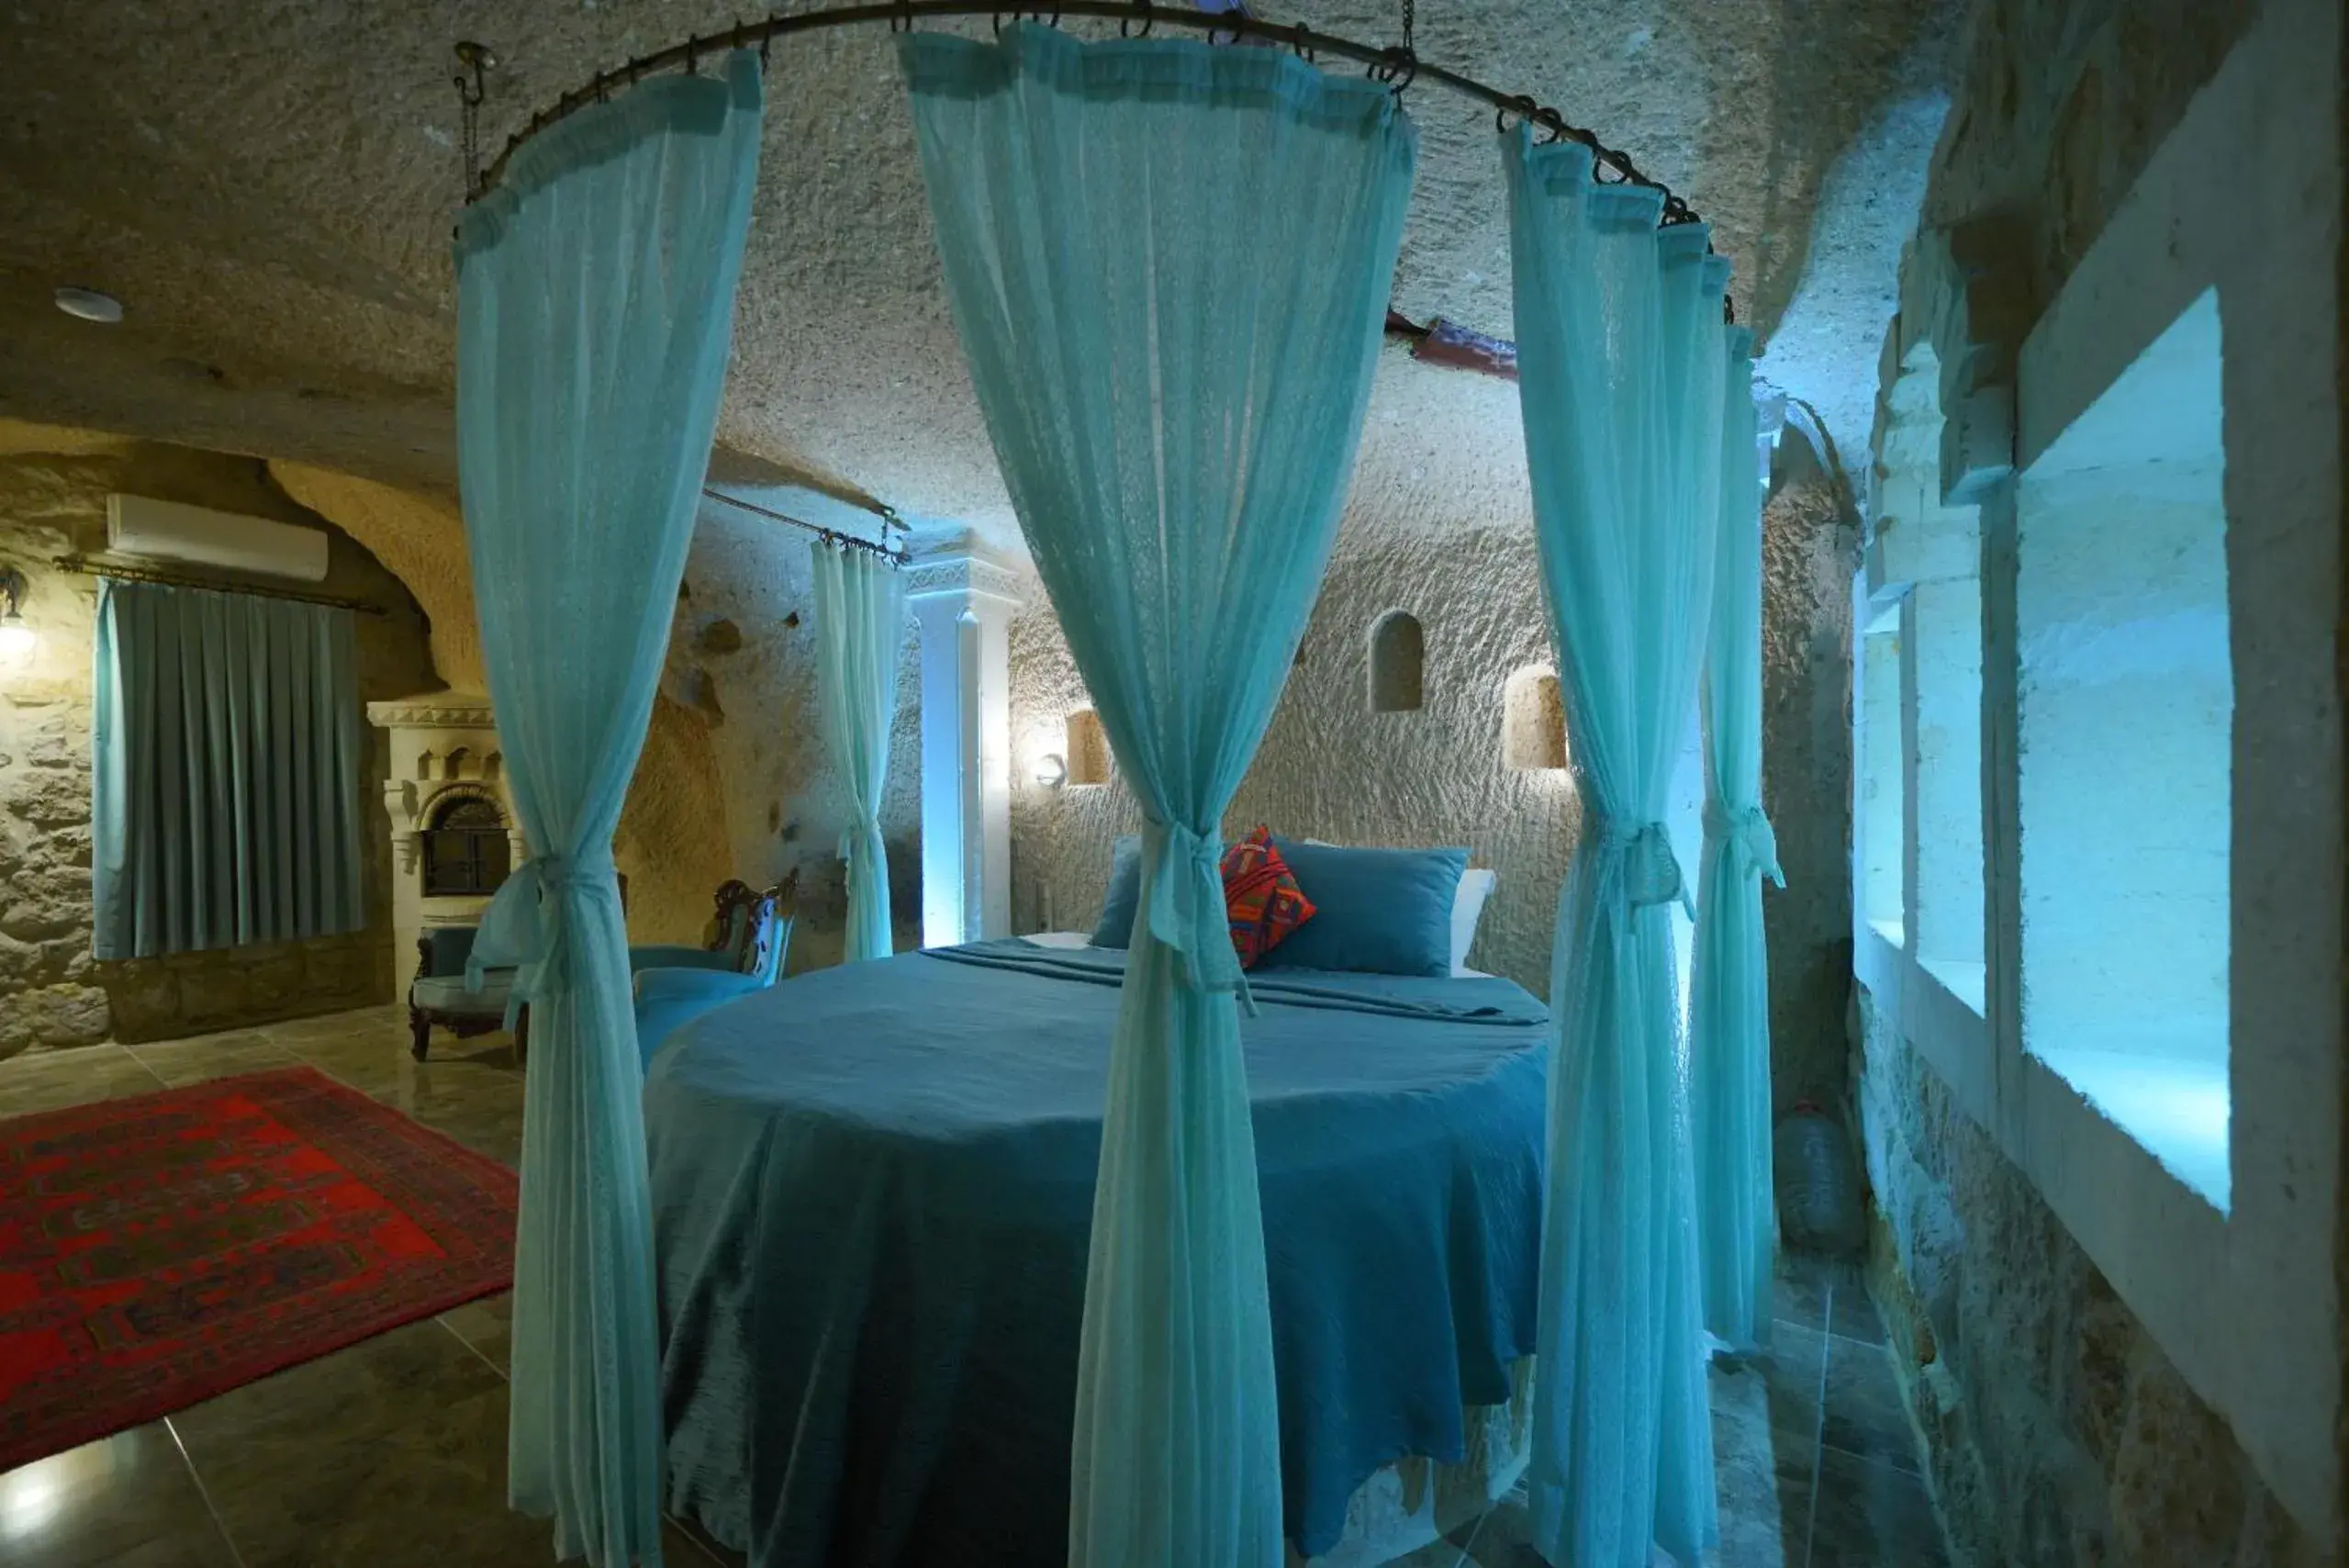 Bed in Holiday Cave Hotel